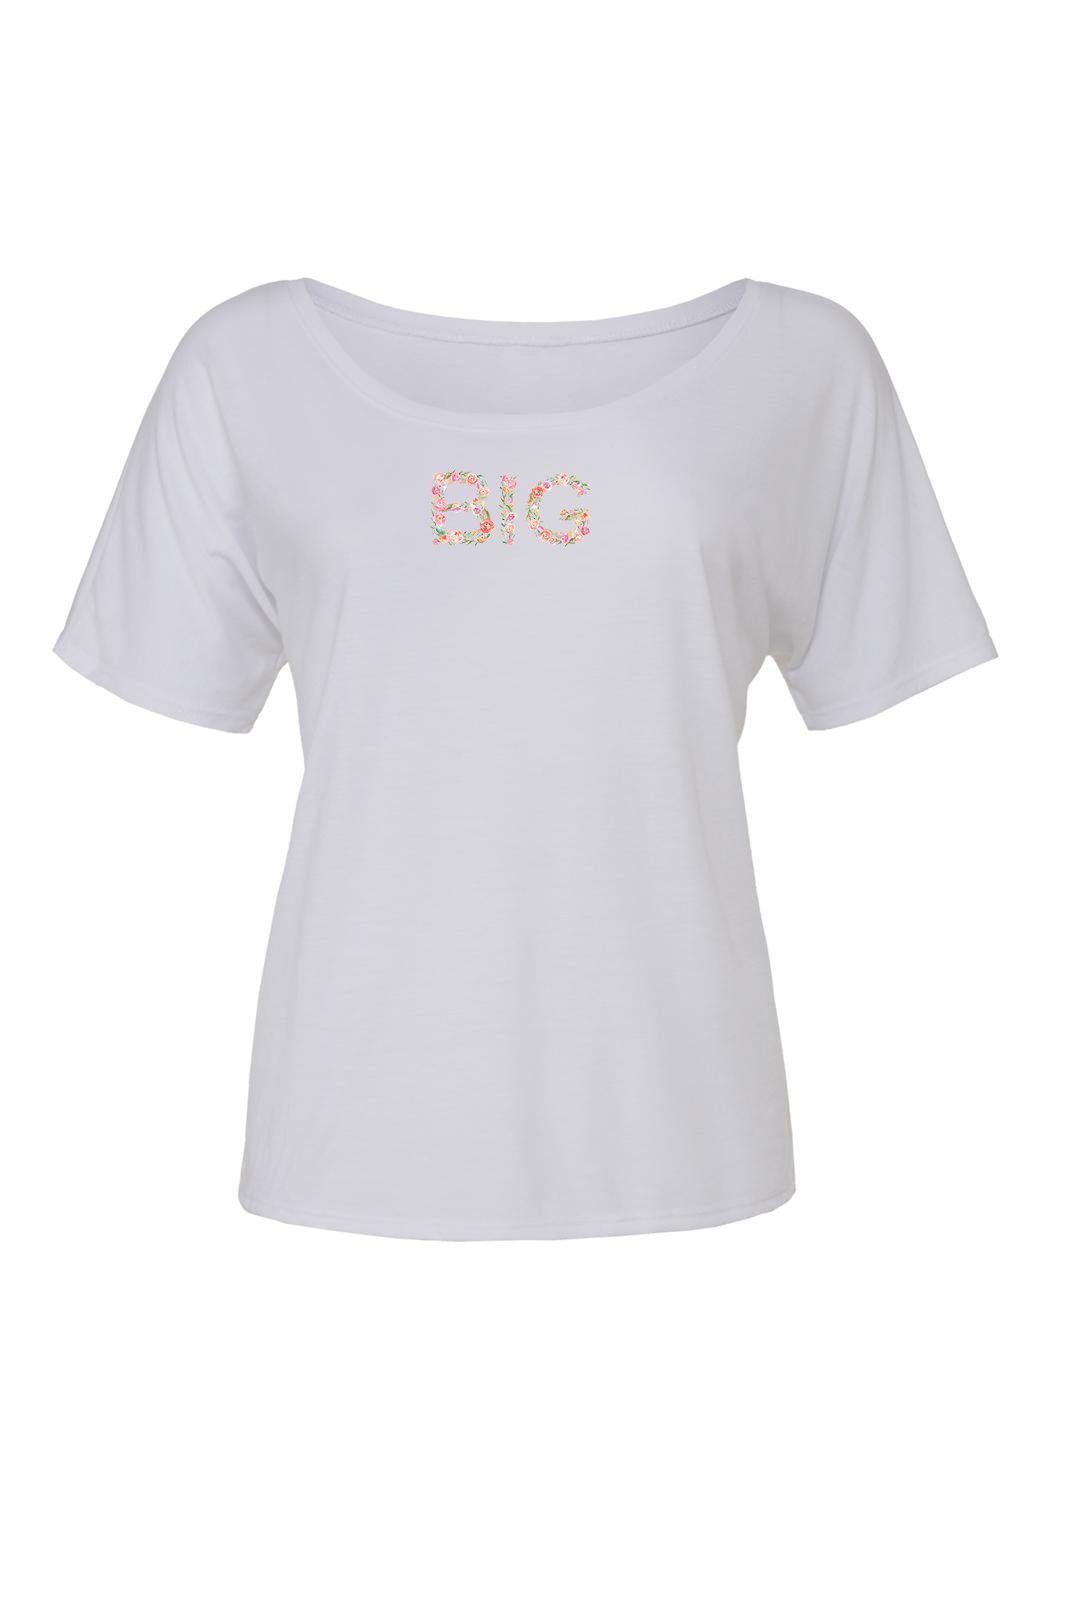 Big Little Floral Letters Shirt - Bella Slouchy Scoop Neck Short Sleeve, Ladies, Sunny and Southern, - Sunny and Southern,